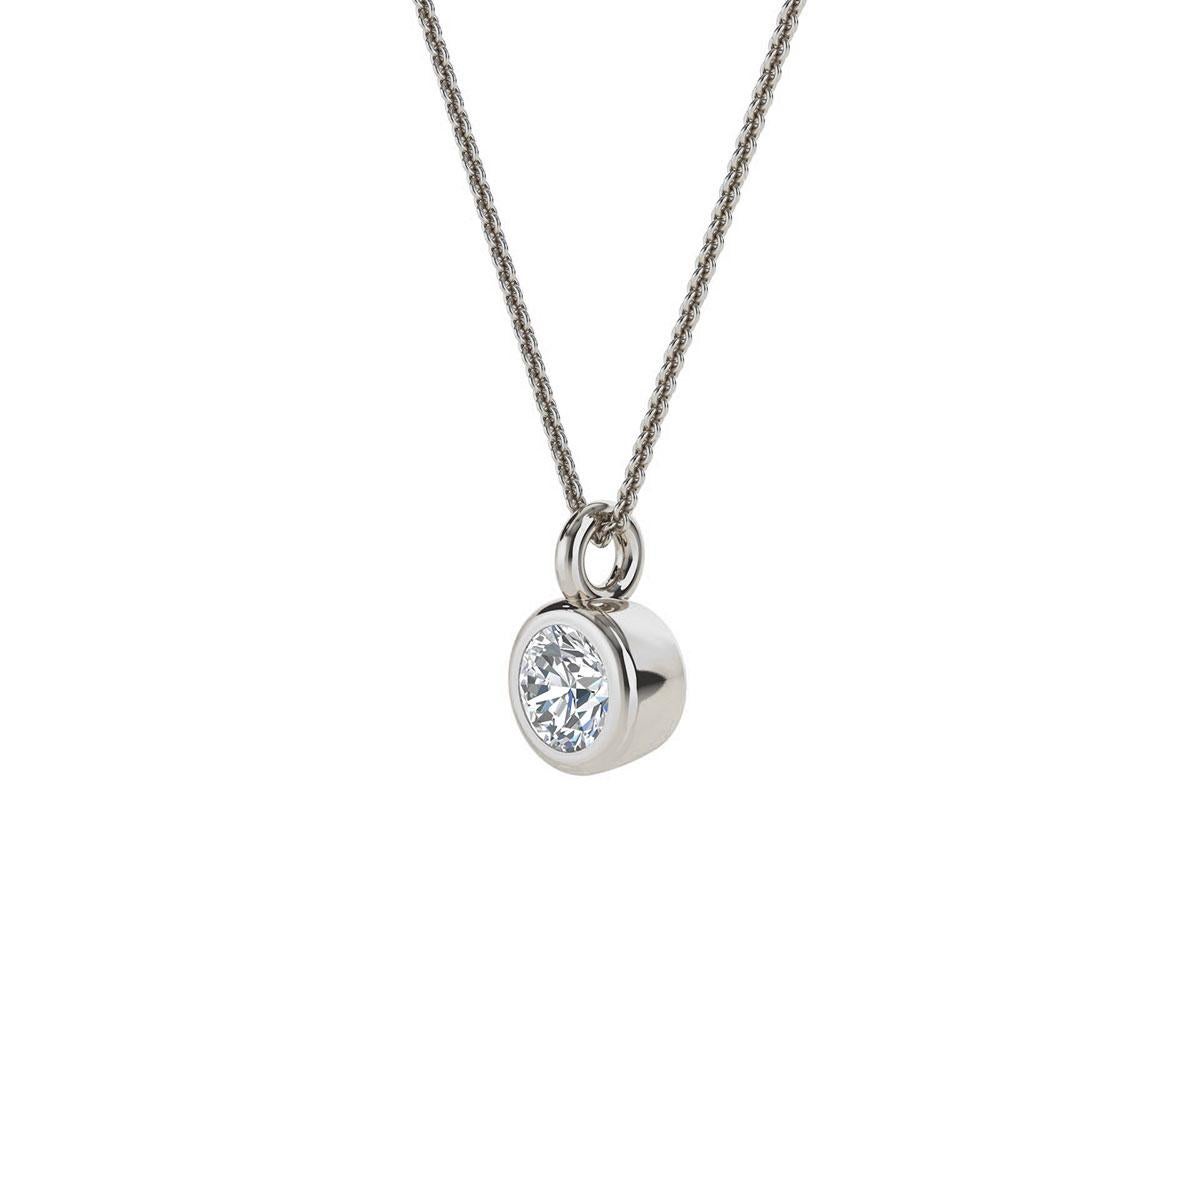 This solitaire pendant features 0.20 carat ( 3.8 mm) natural round brilliant diamond set in a thin bezel. Experience the difference in person!

Product details: 

Center Gemstone Type: NATURAL DIAMOND
Center Gemstone Color: WHITE
Center Gemstone